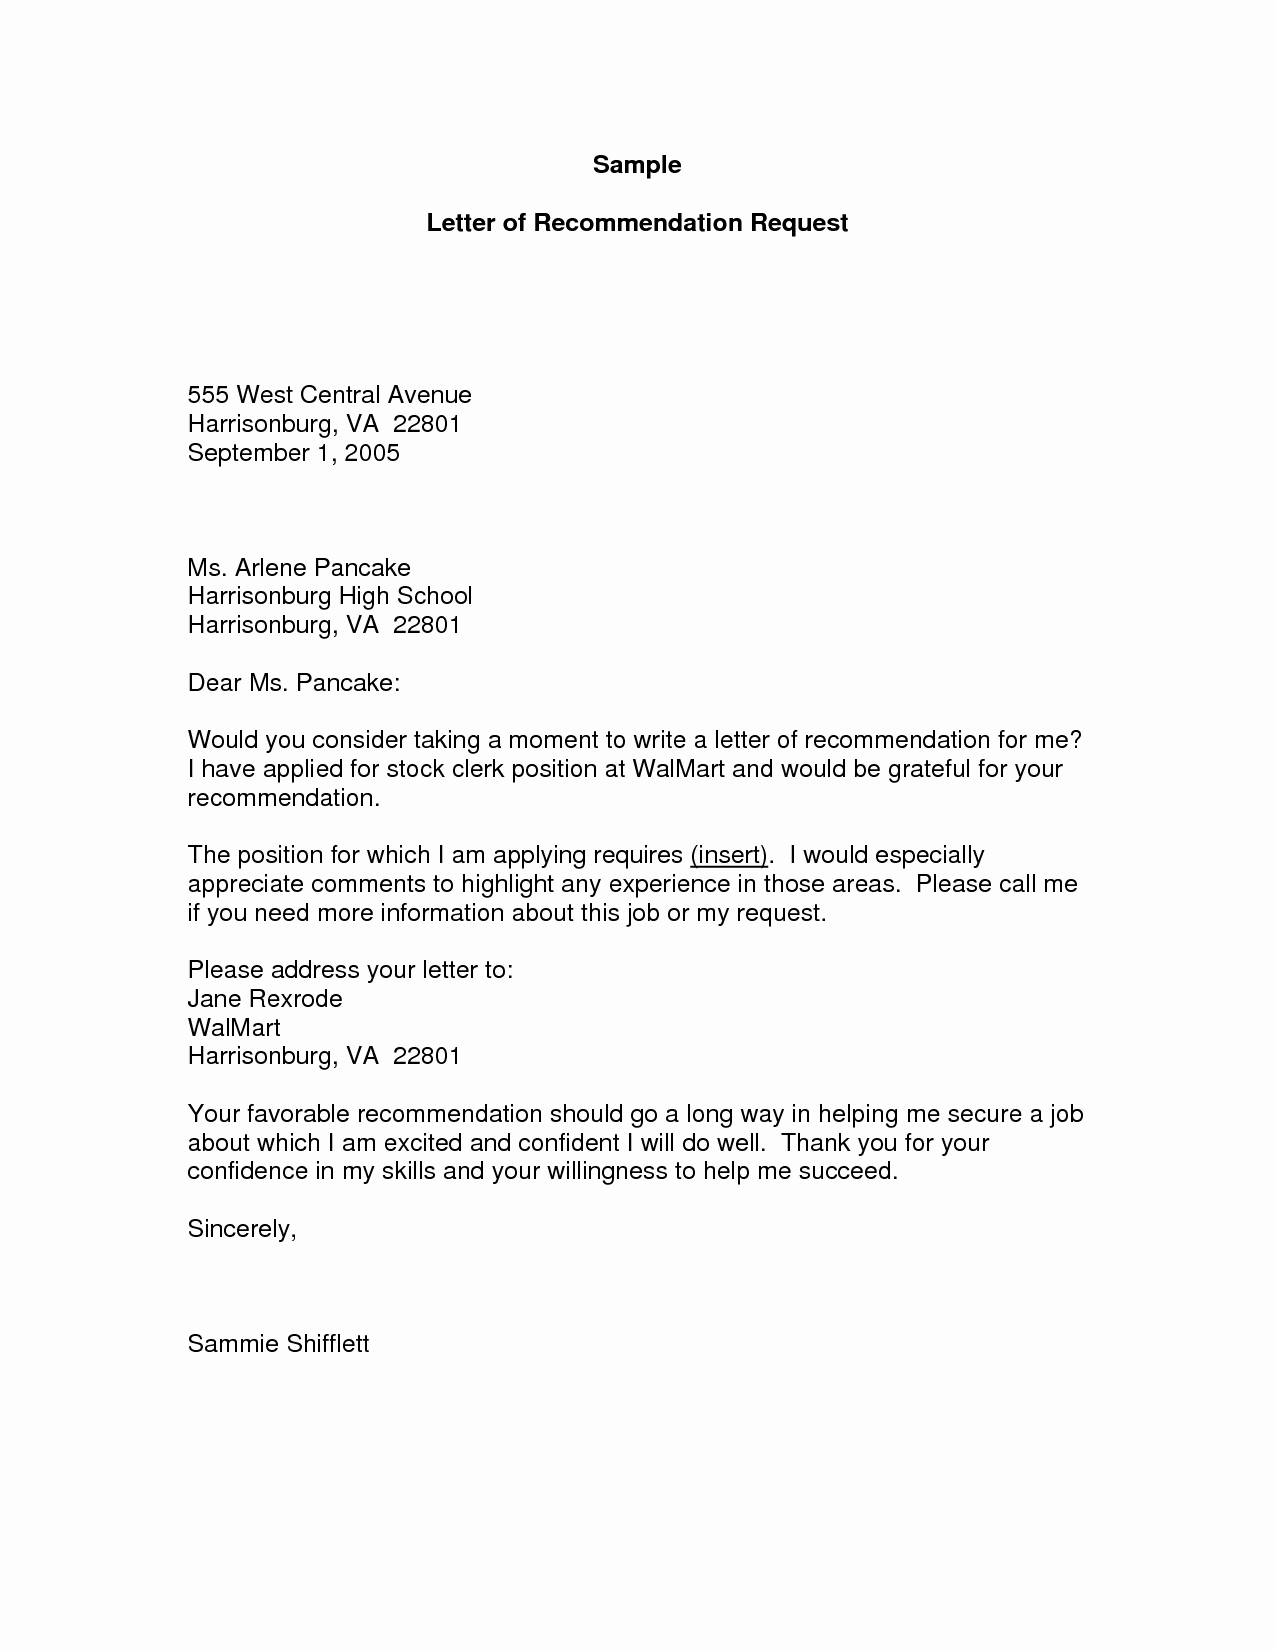 Format Of A Recomendation Letter New Re Mendation Letter Request Sample